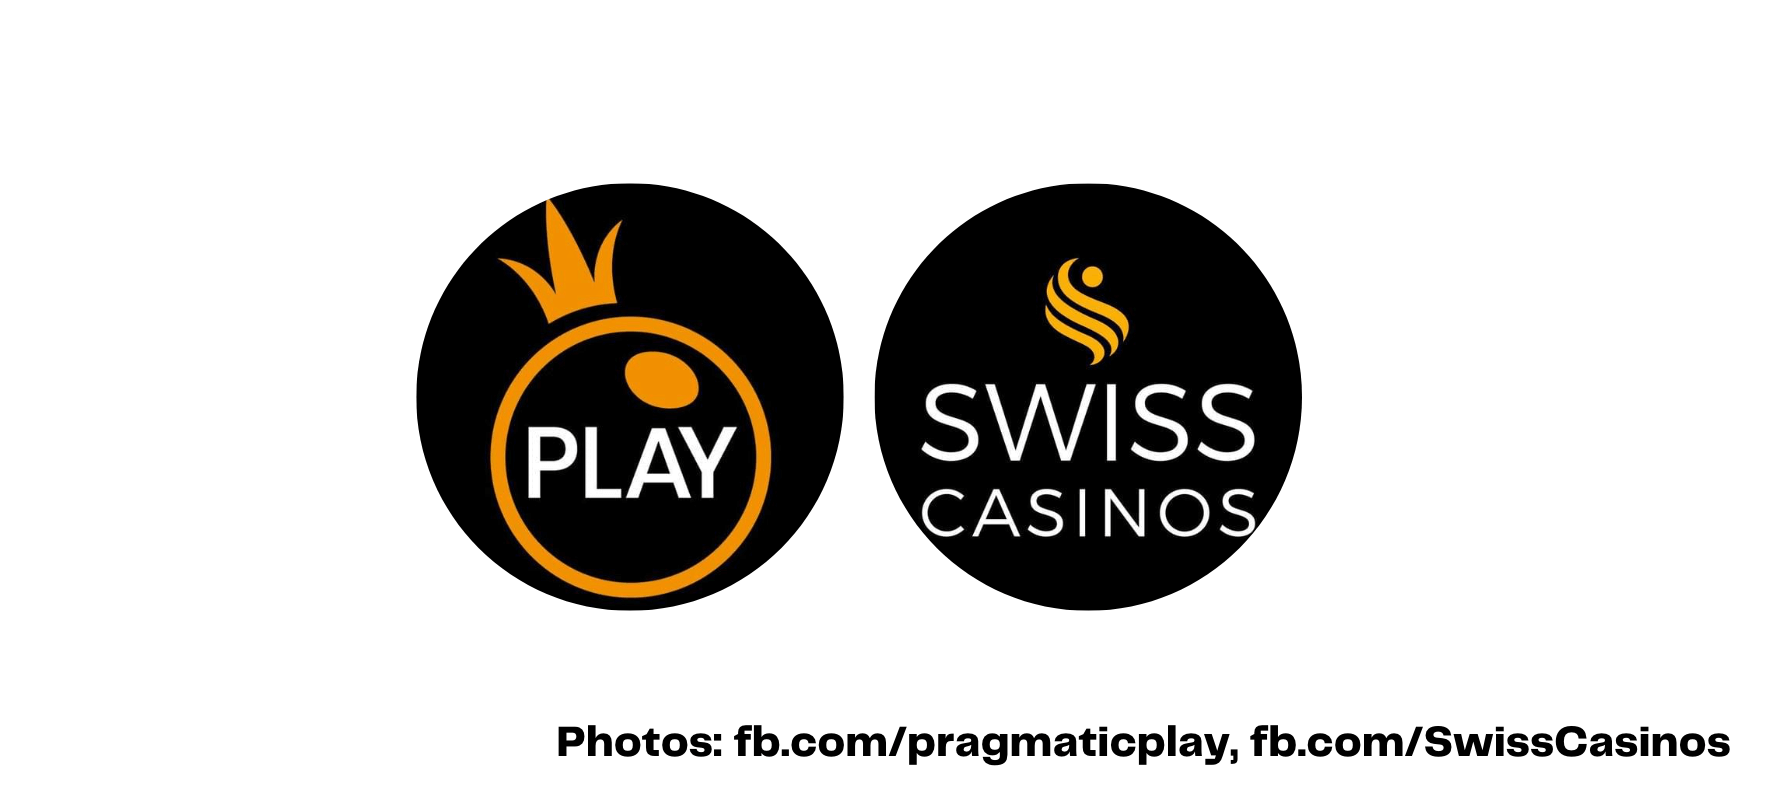 Pragmatic Play and Swiss Casinos team up following deal